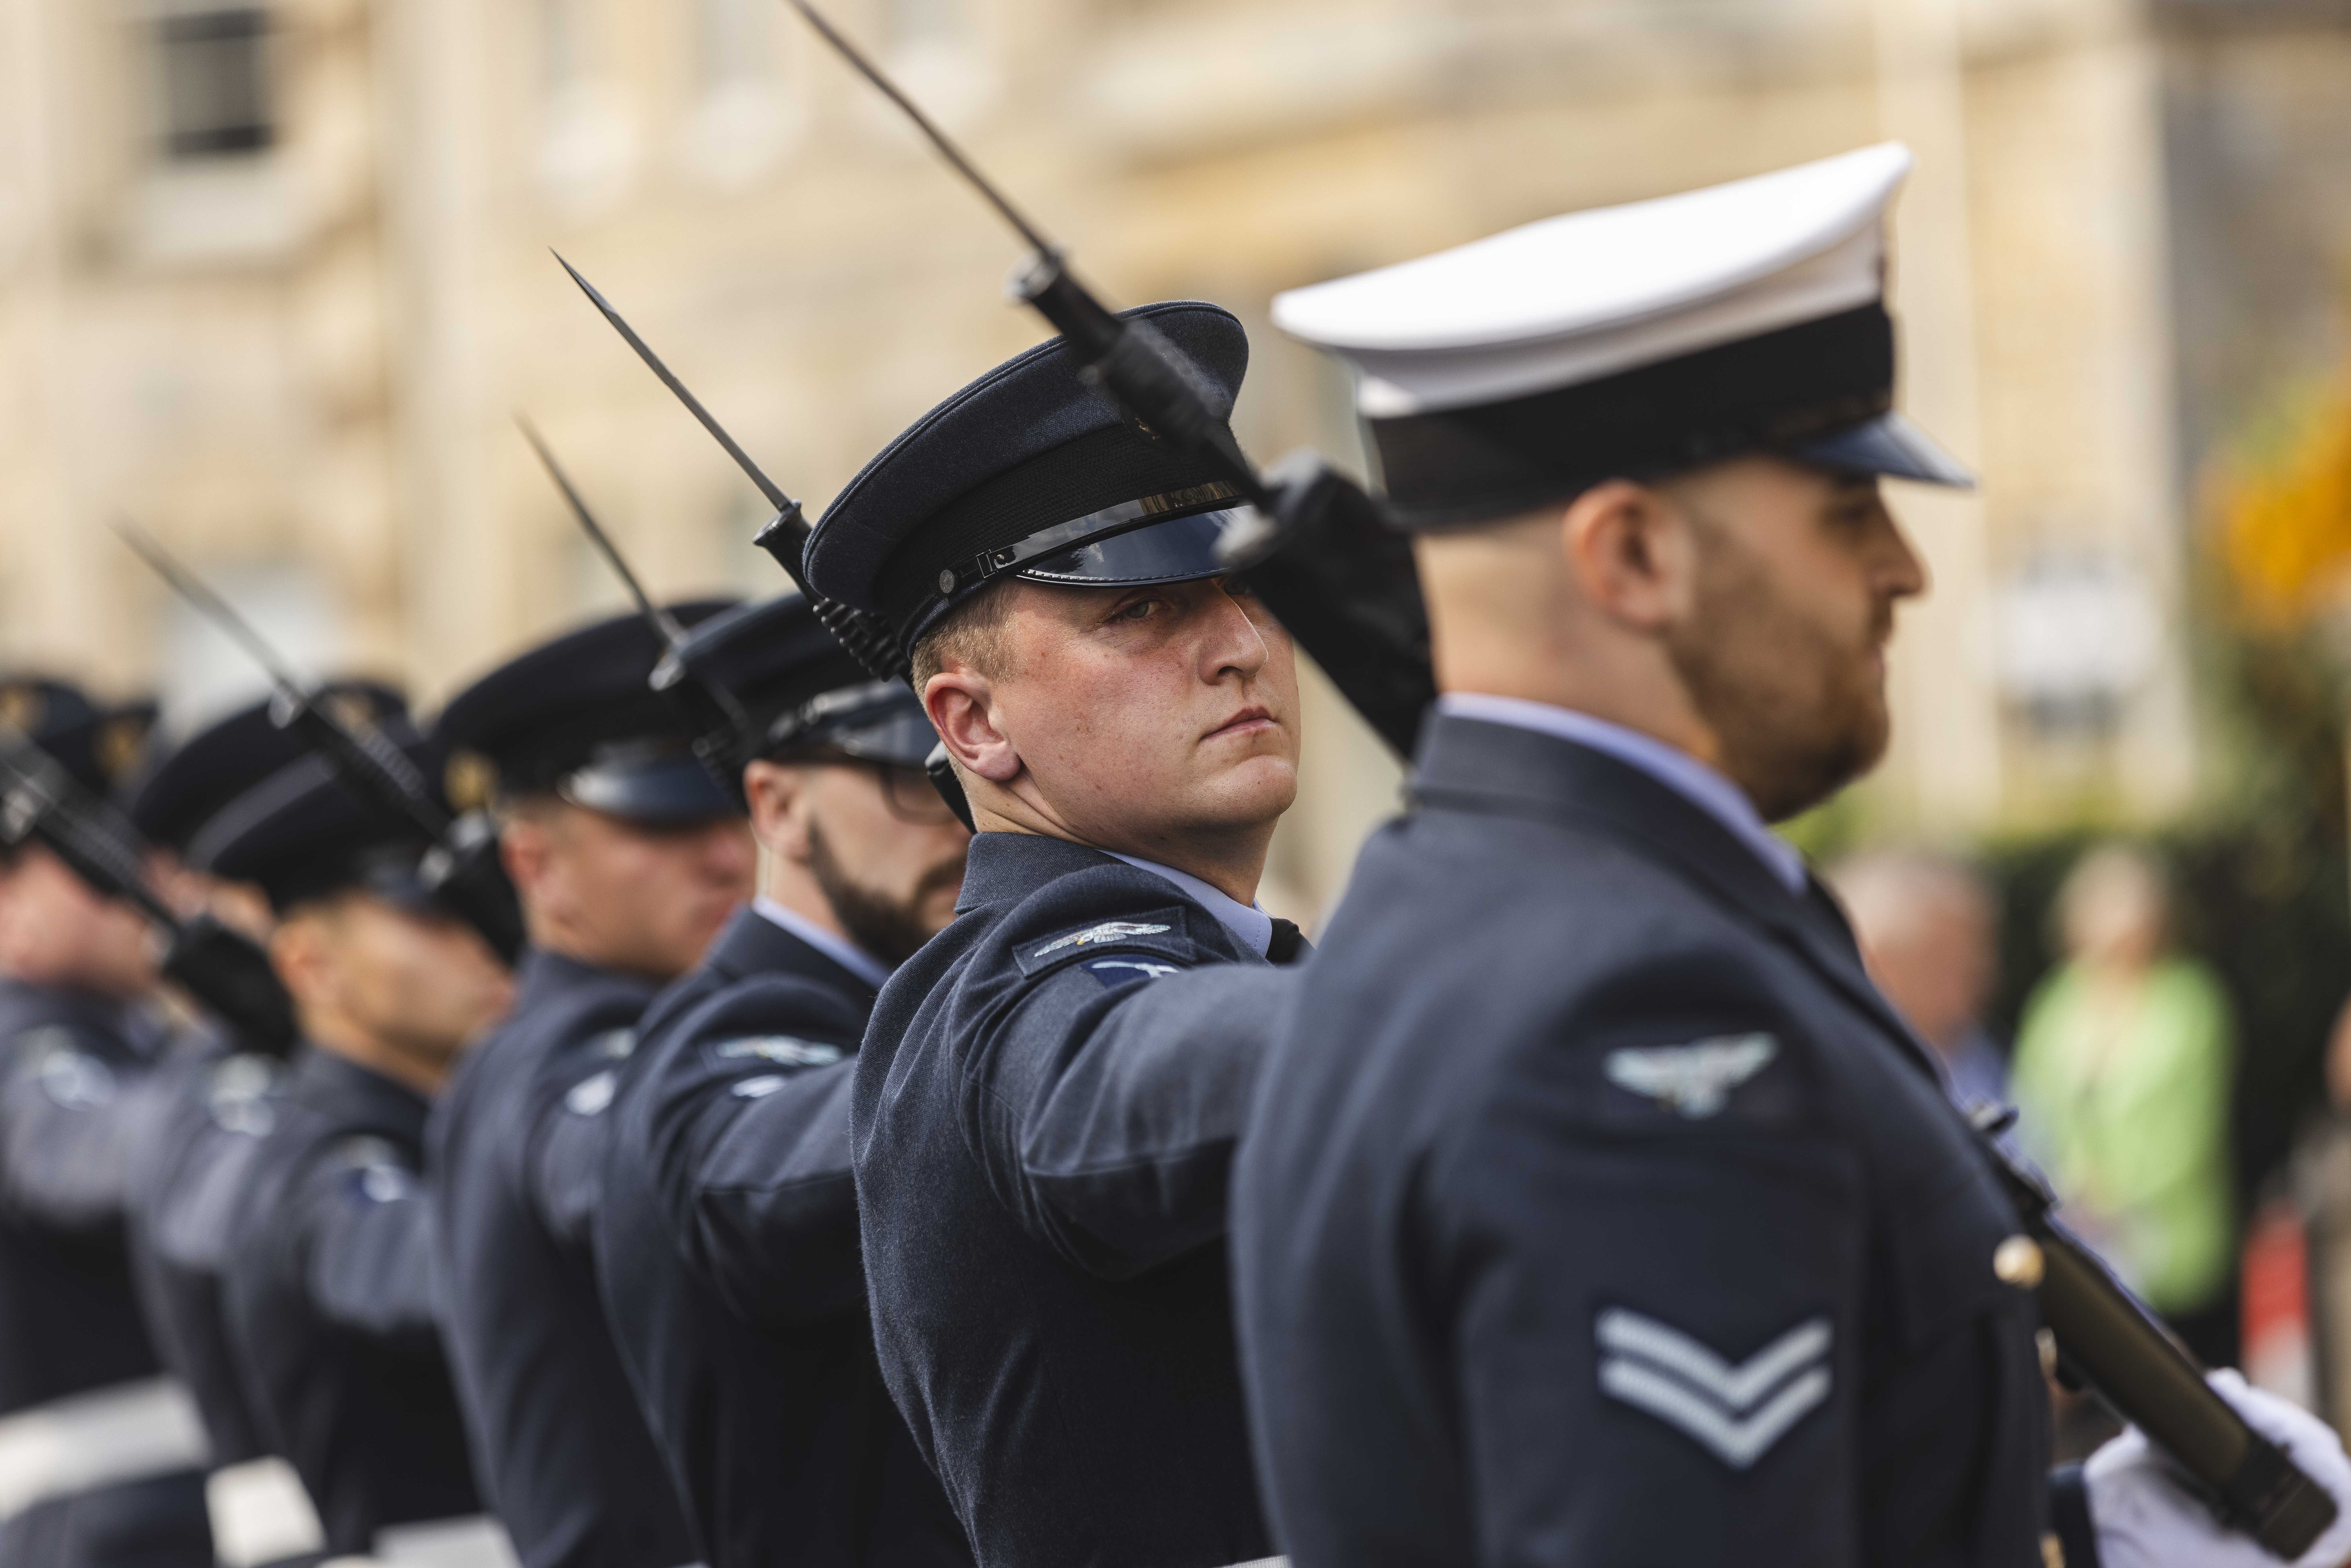 Personnel from RAF Wittering paraded through the town to mark the Battle of Britain and the Freedom of Stamford